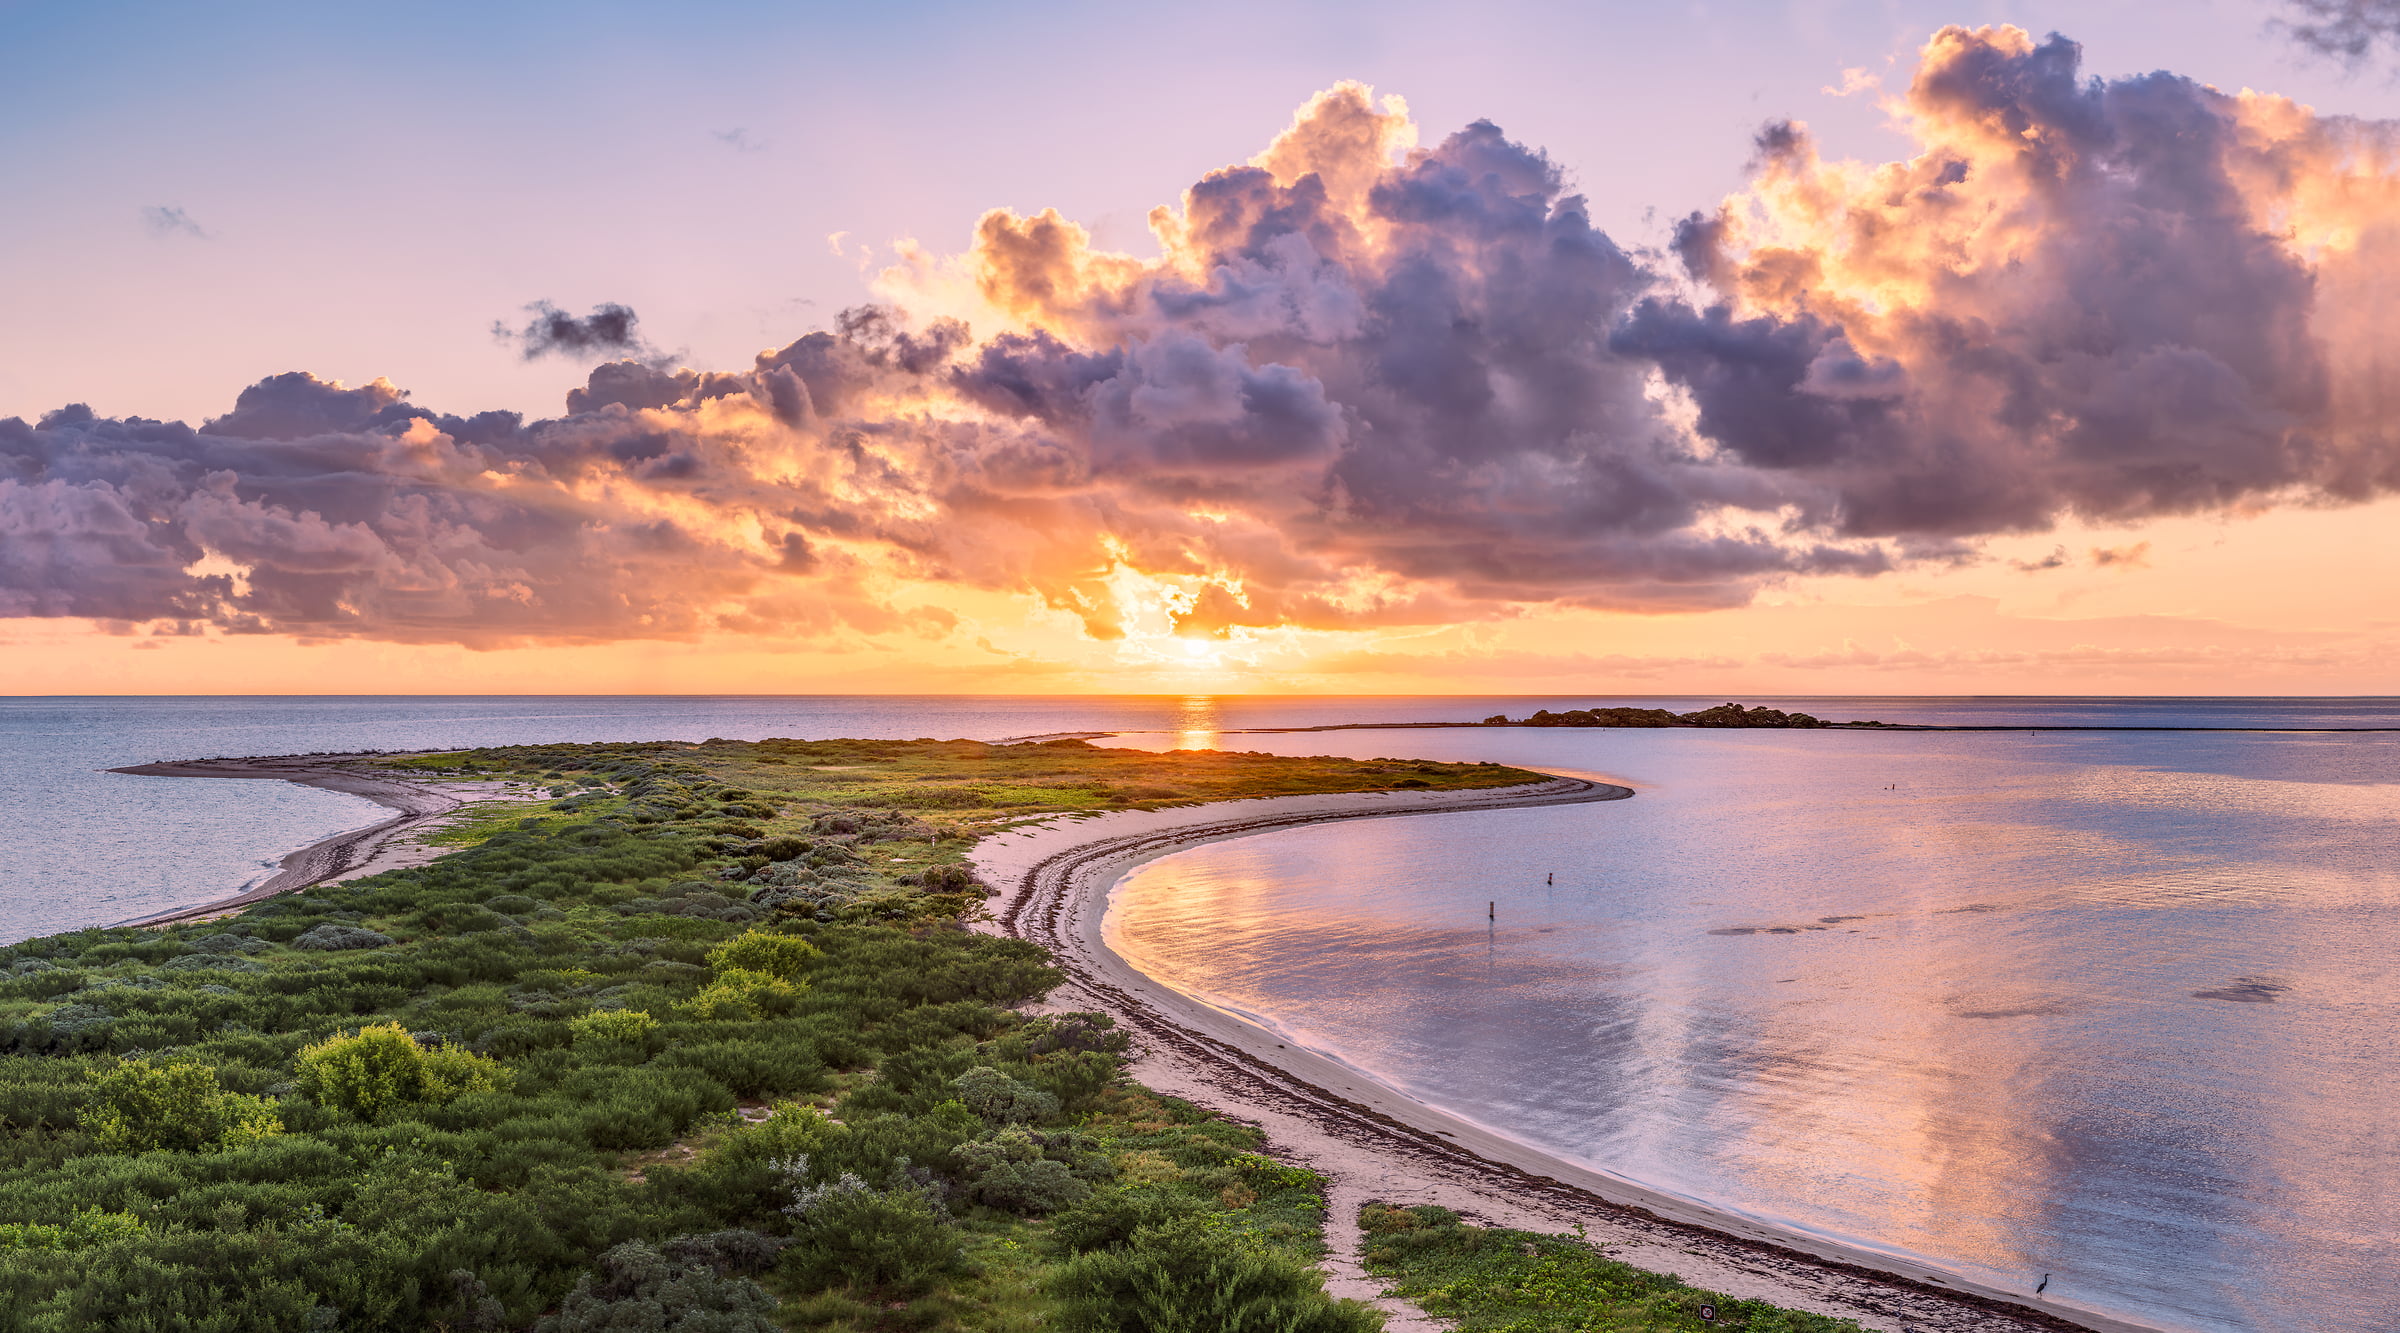 717 megapixels! A very high resolution, large-format VAST photo print of sunset over the Atlantic Ocean in Dry Tortugas National Park; photograph created by Chris Blake in Florida